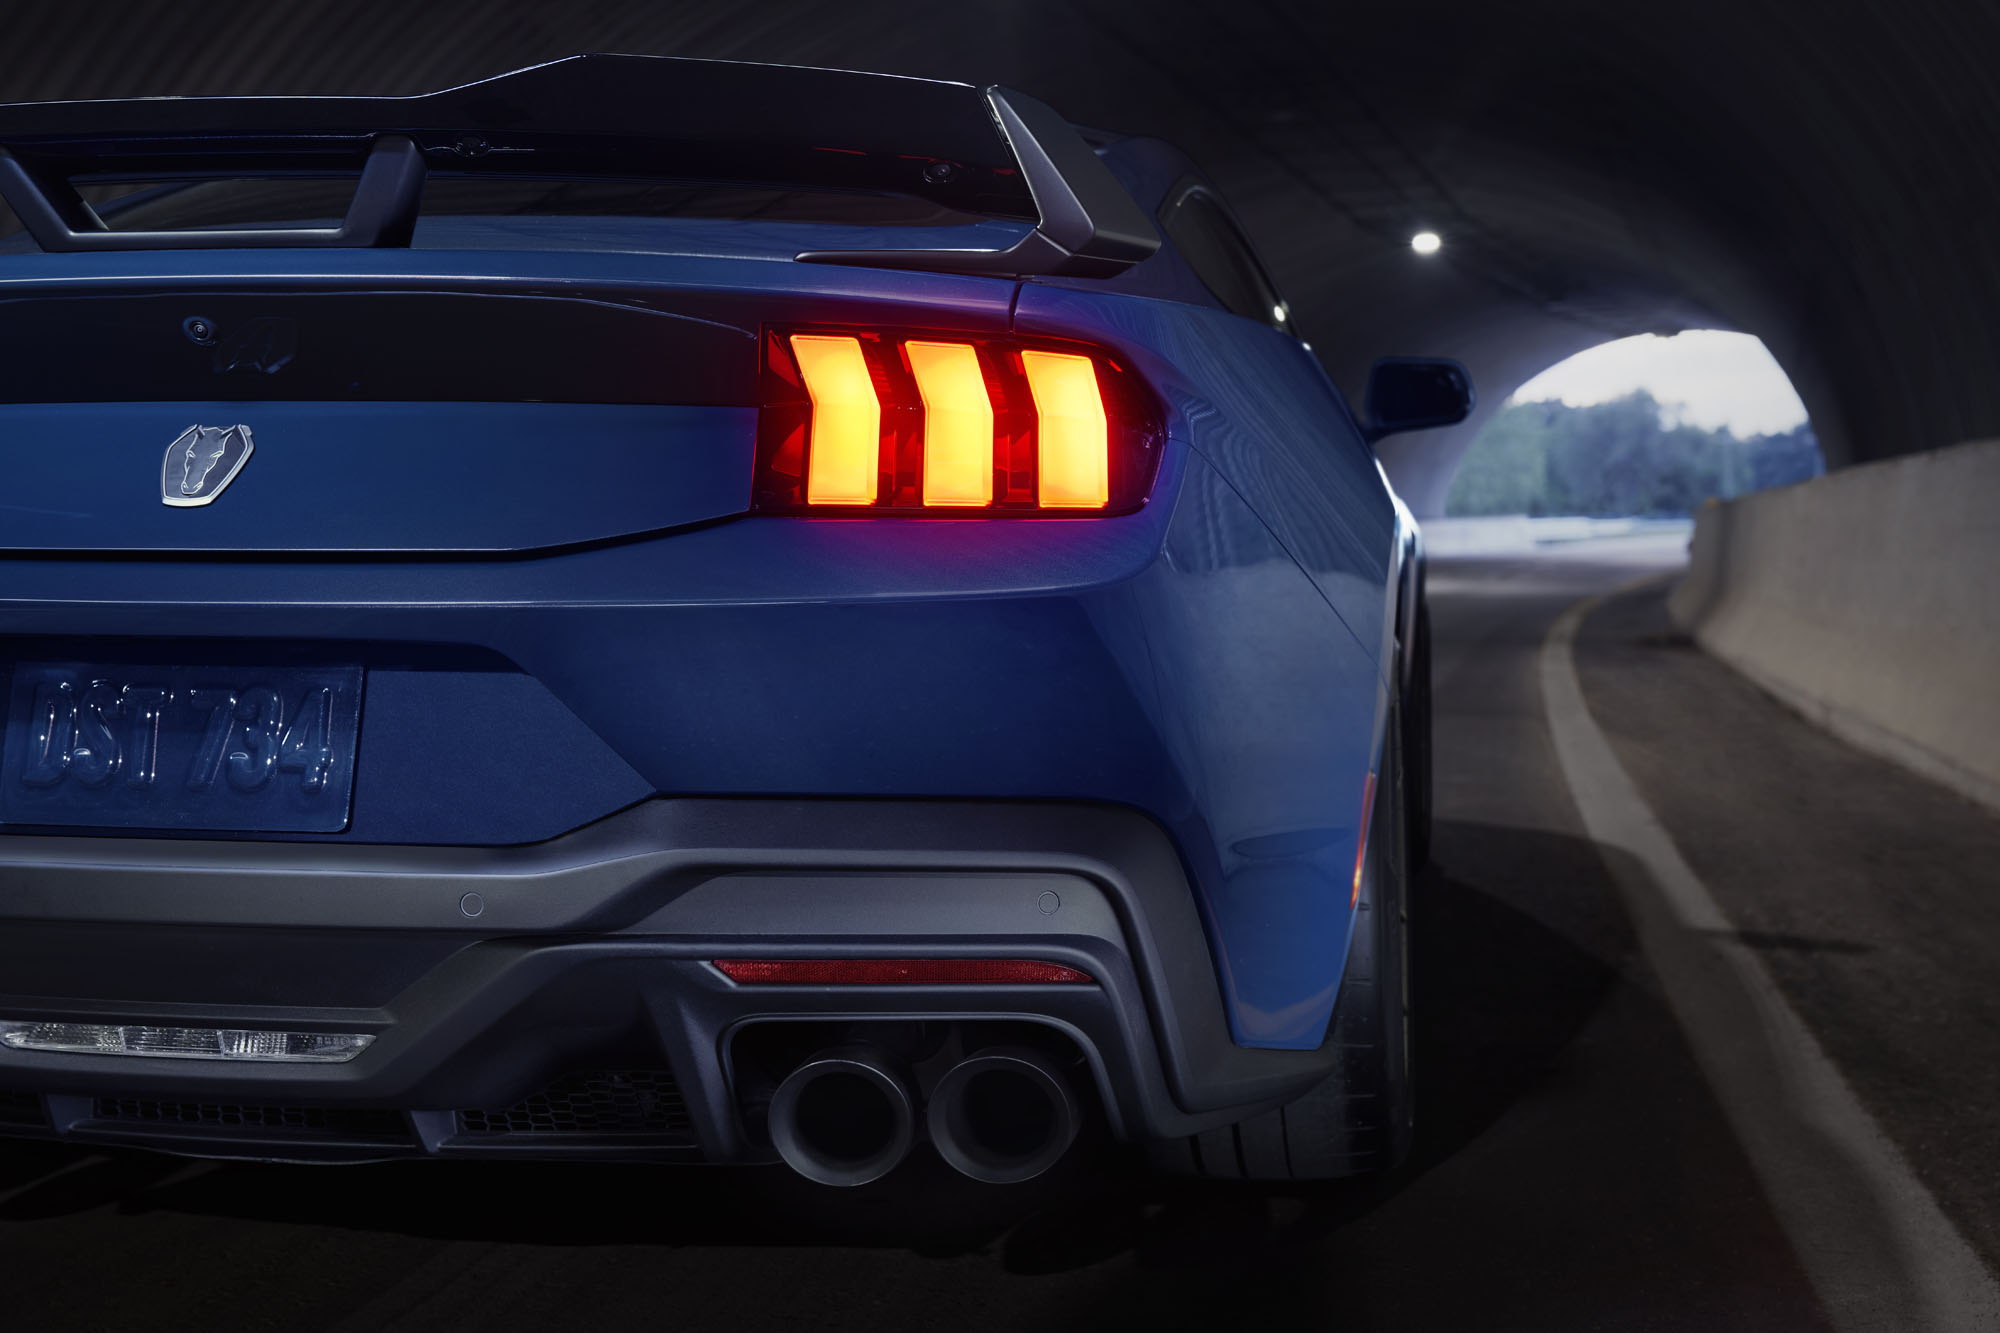 ford, ford mustang, ford mustang dark horse, next-generation ford mustang dark horse – south african pricing revealed